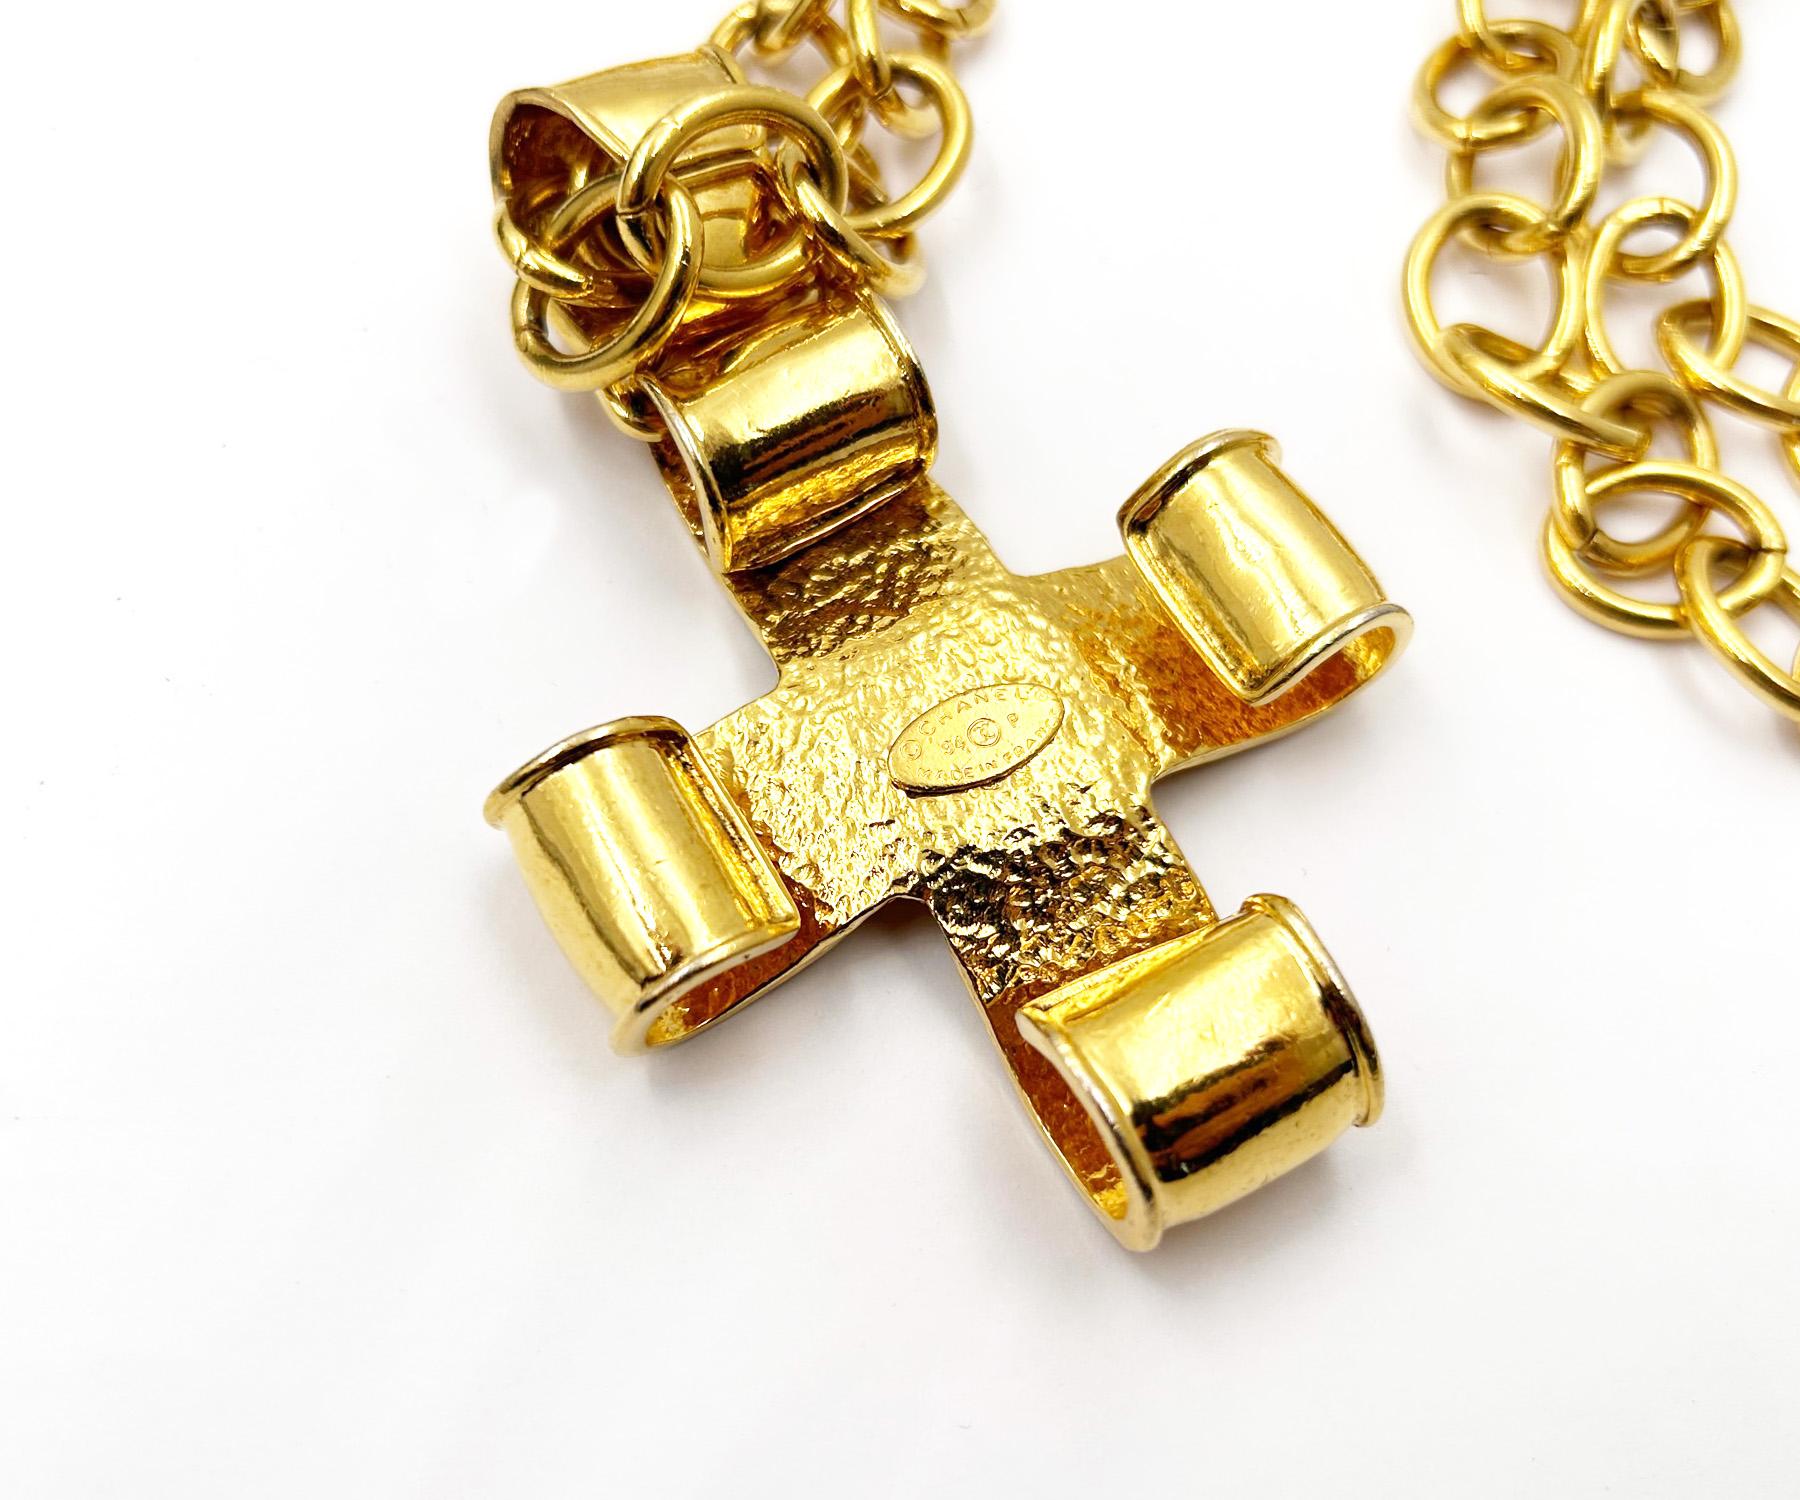 Chanel Vintage Gold Plated Large Cross Pendant Long Chain Necklace In Excellent Condition For Sale In Pasadena, CA